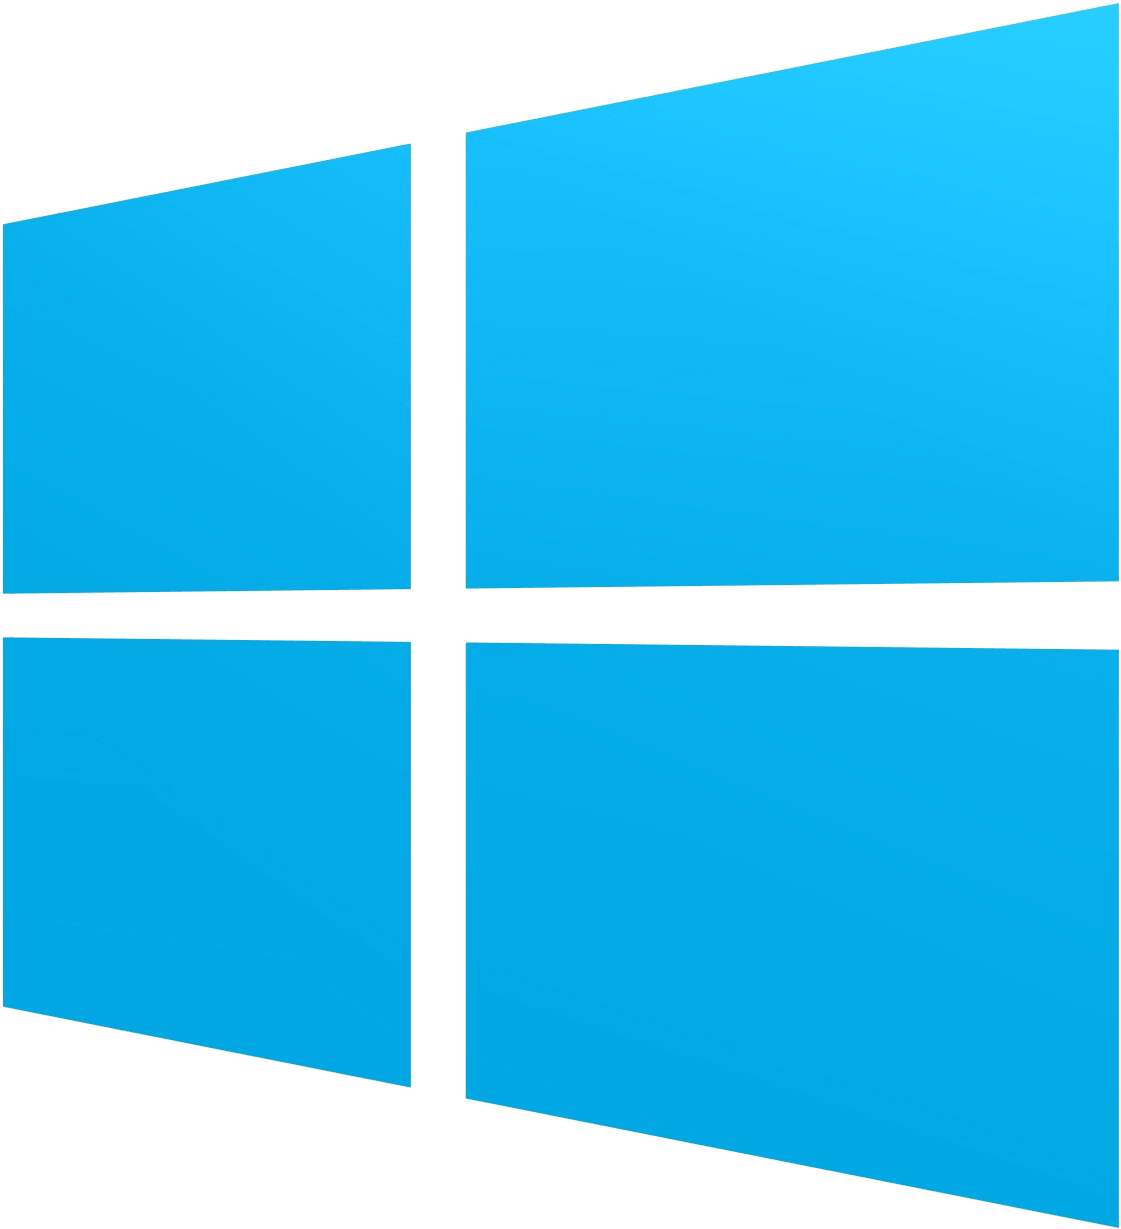 enable-kill-switch-on-windows-in-France